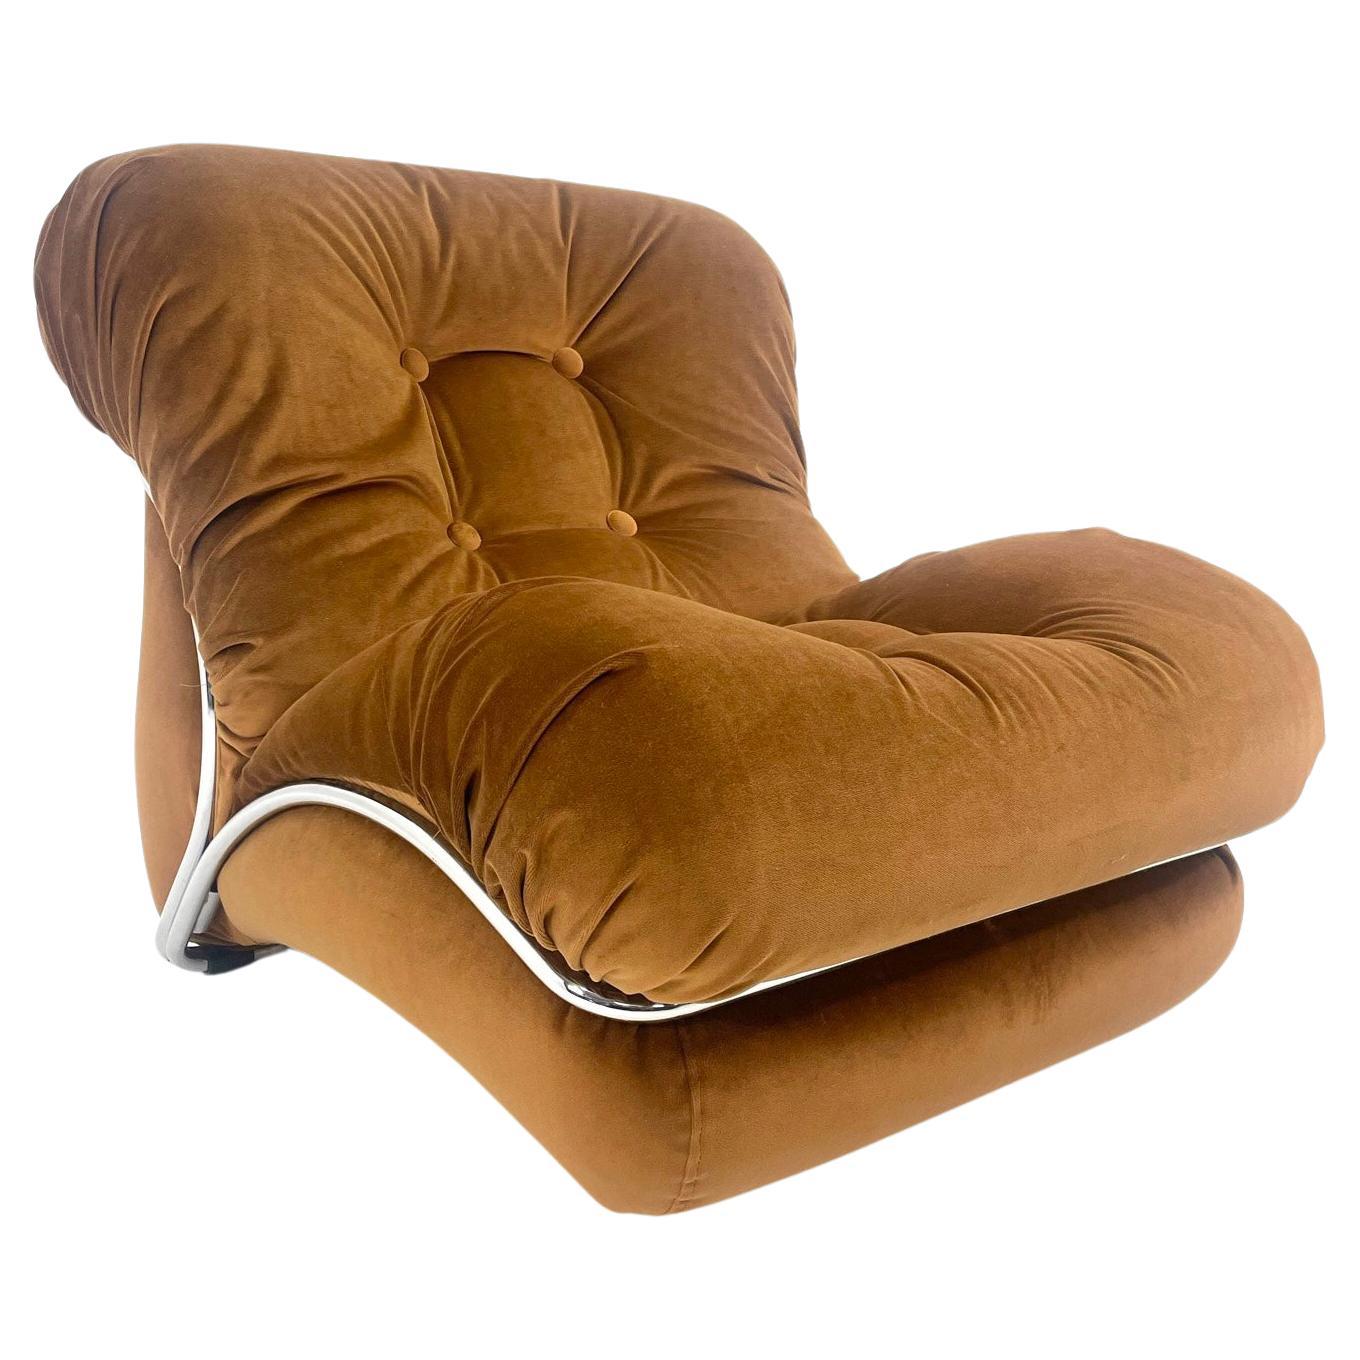 I.P.E. 'Corolla' Lounge Chair (2 available) For Sale